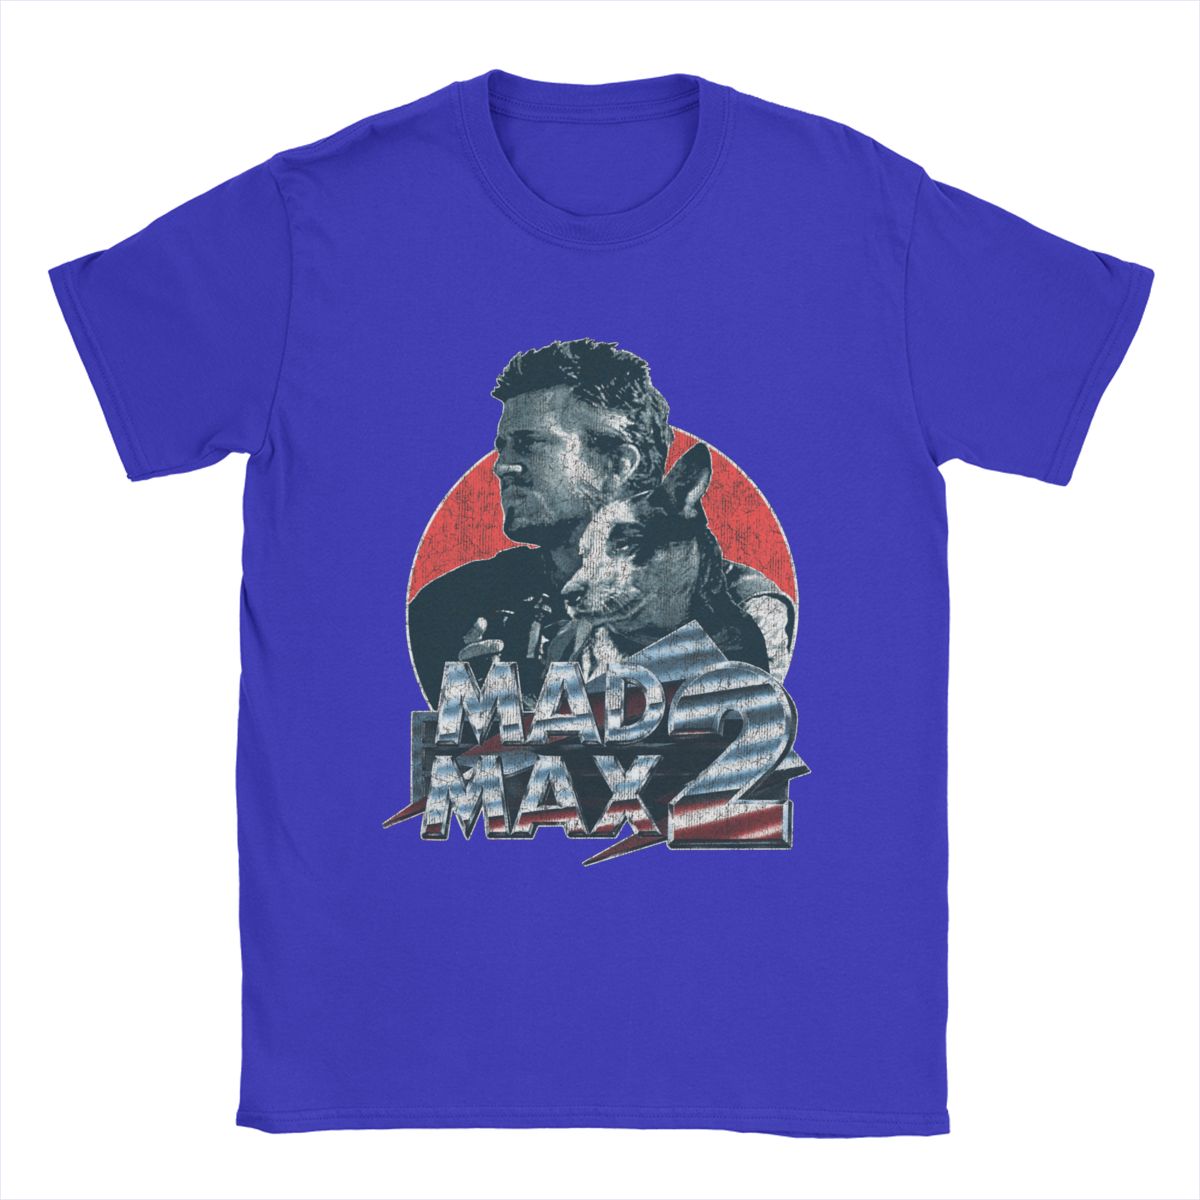 Mad Max - T-Shirt 100% Cotton - Classic 1980's Action - Movie Buff Fanwear-Blue-S-